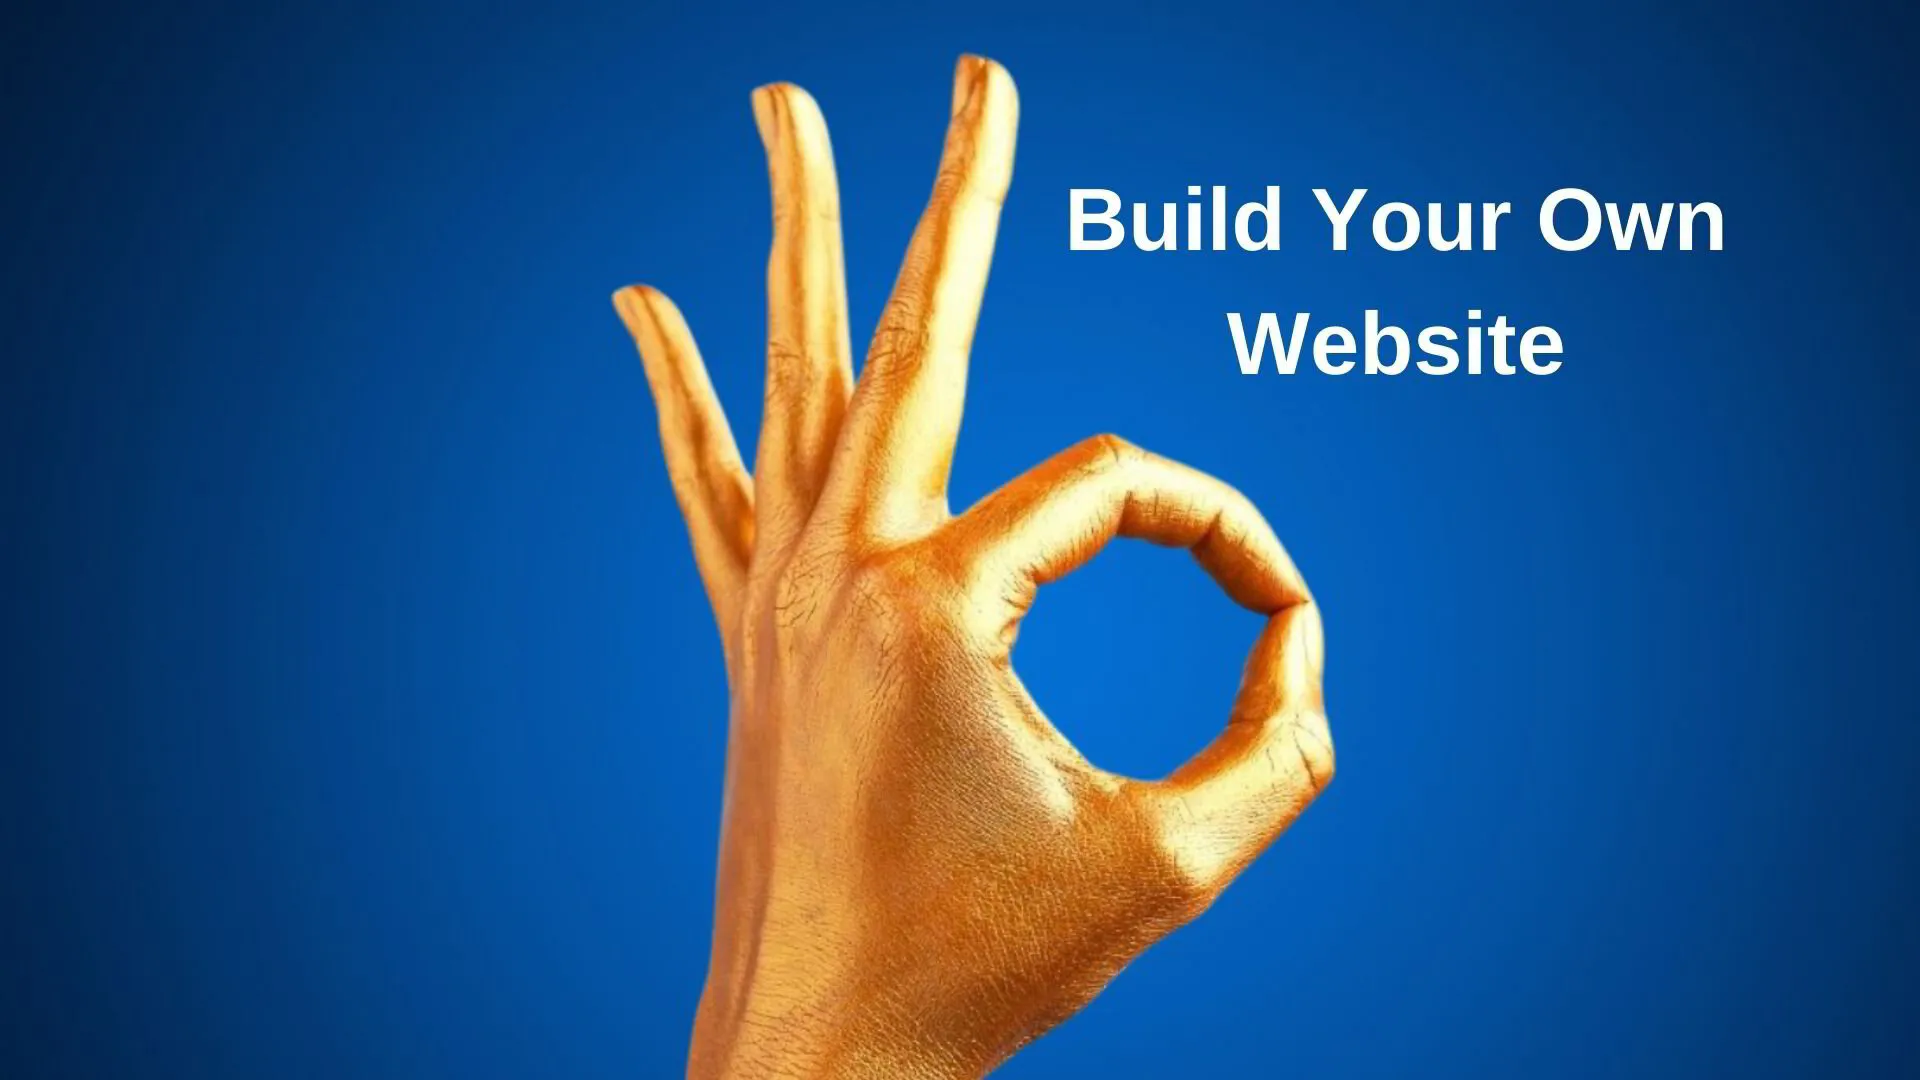 Build Your Own Website Course